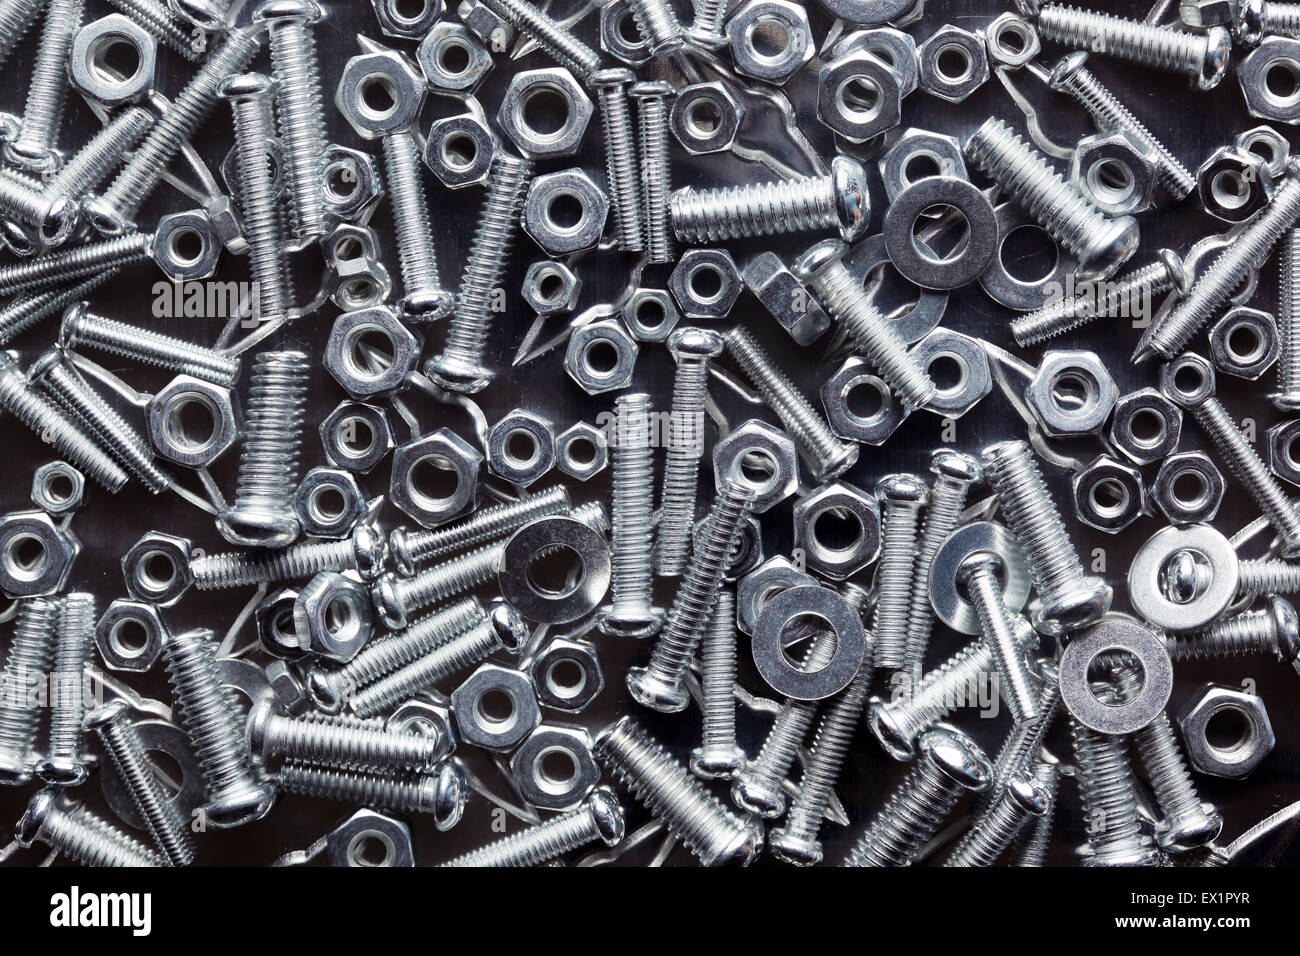 Nuts and bolts background Stock Photo